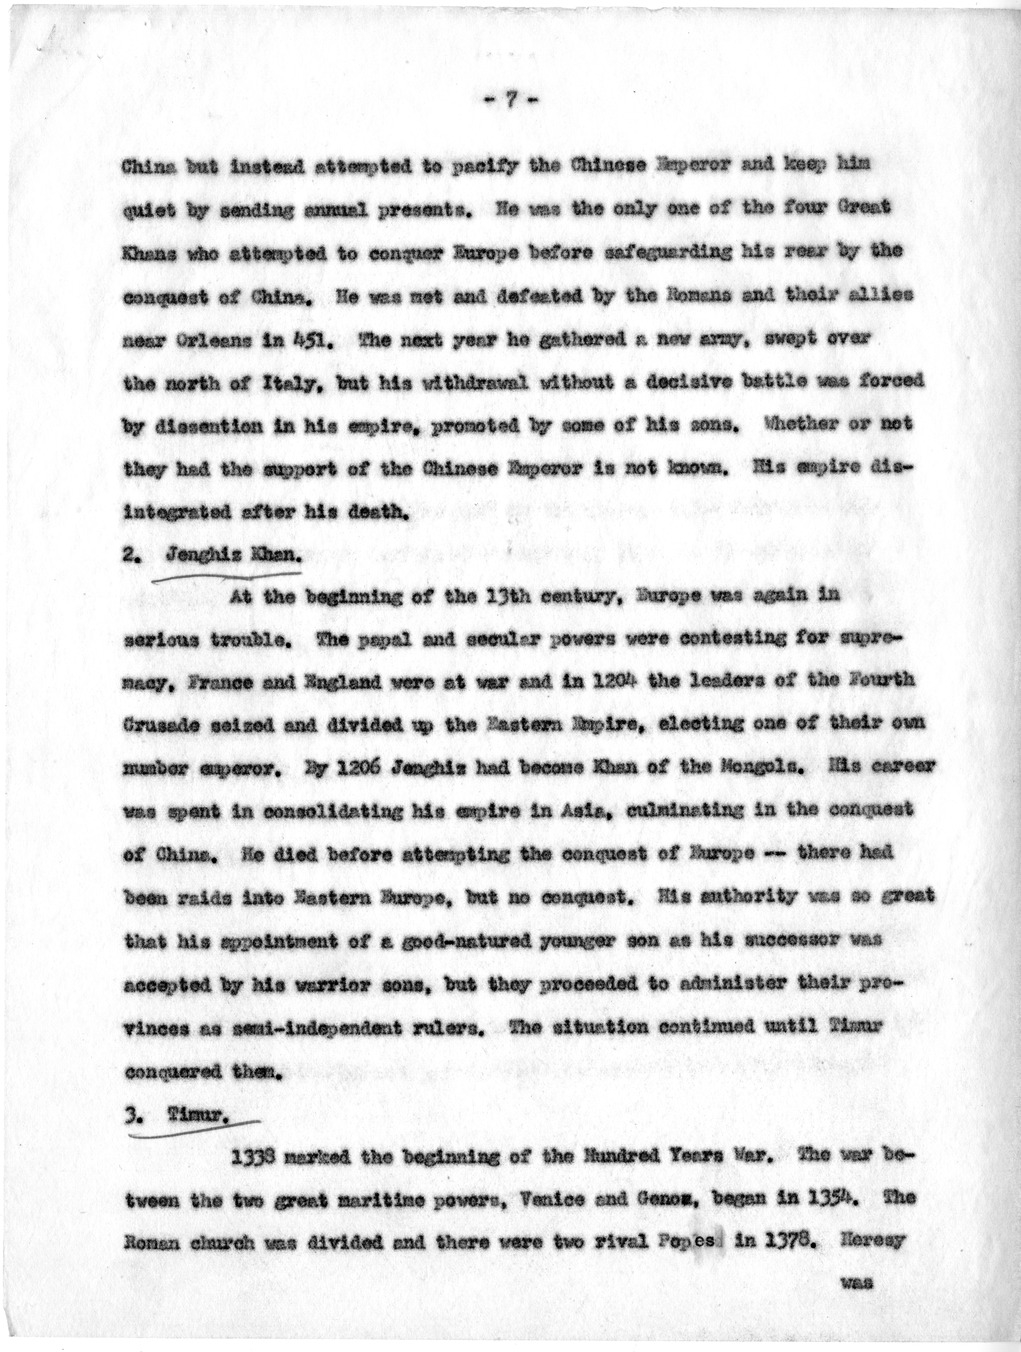 Memorandum from Paul G. Hoffman to Robert N. Golding with Attached Draft of Report, The "Cold War" - What it is and What Must Be Done to Win it Without Fighting